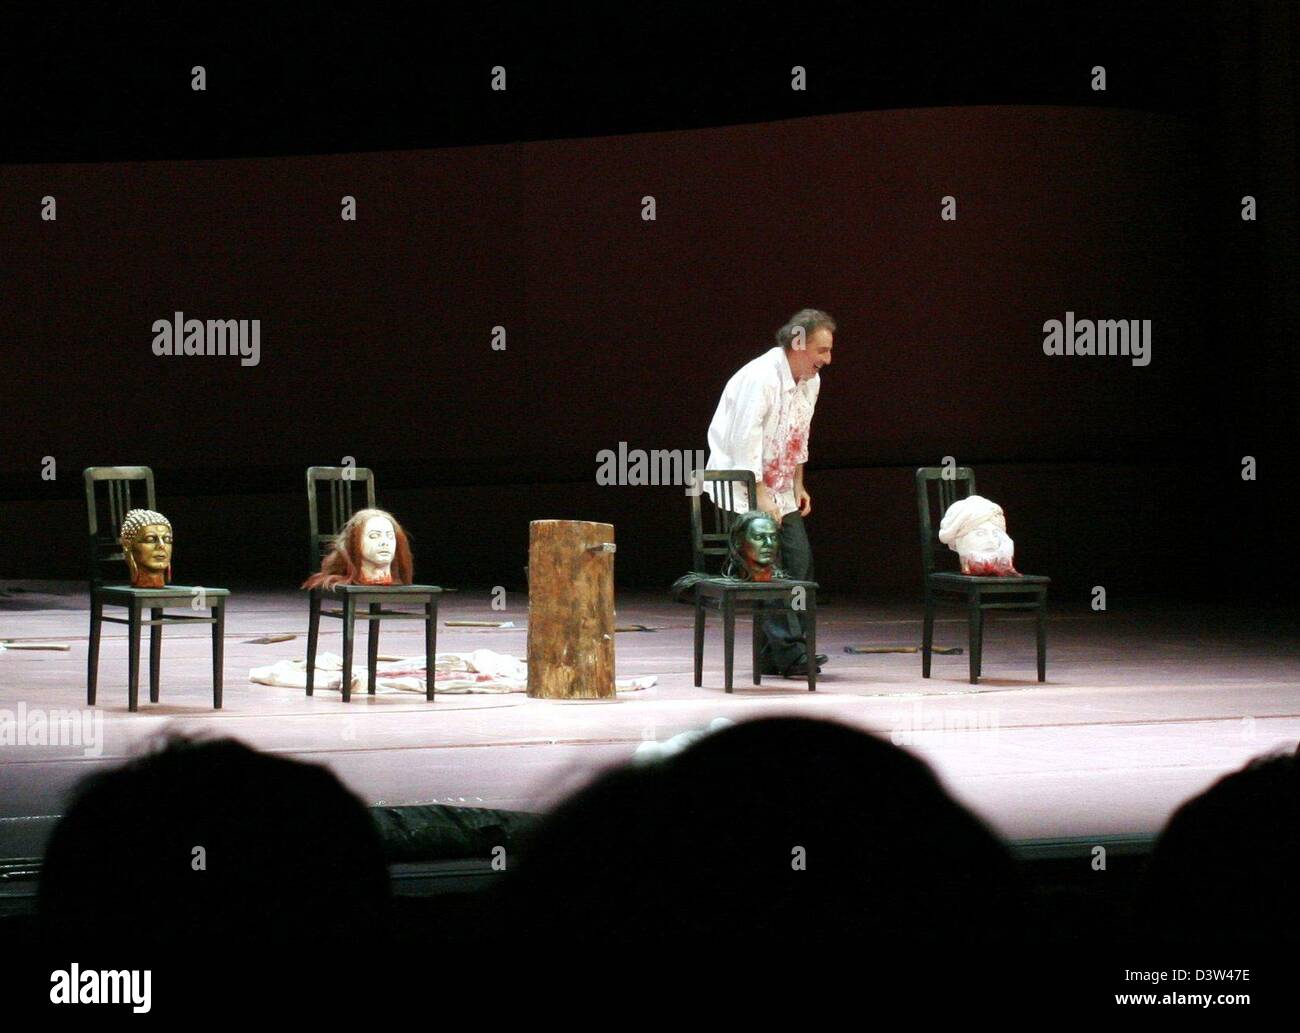 The picture shows the disputed final scene of the 'Idomeneo' staging by Hans Neuenfels at the German Opera in Berlin, Monday 18 December 2006. The production of the opera Idomeneo that had been cancelled due to fears of attacks by militant muslims was resumed on Monday, 18 December under police protection. In the last scene the beheaded heads of Jesus, Buddha and Muhammad are displ Stock Photo